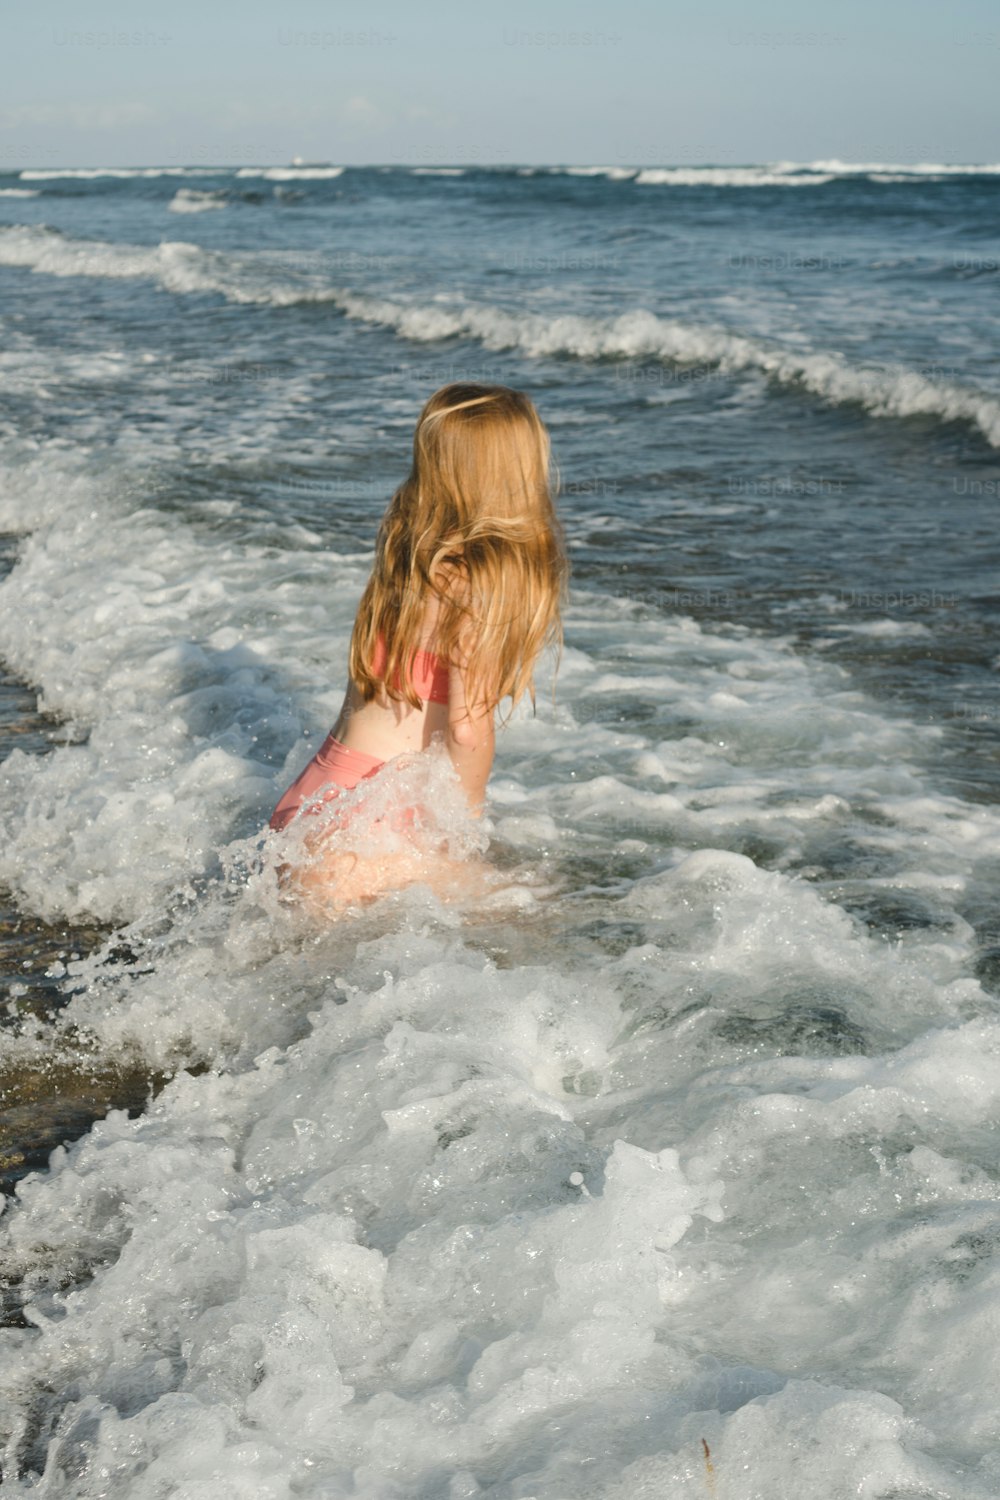 a woman playing in the water at the beach